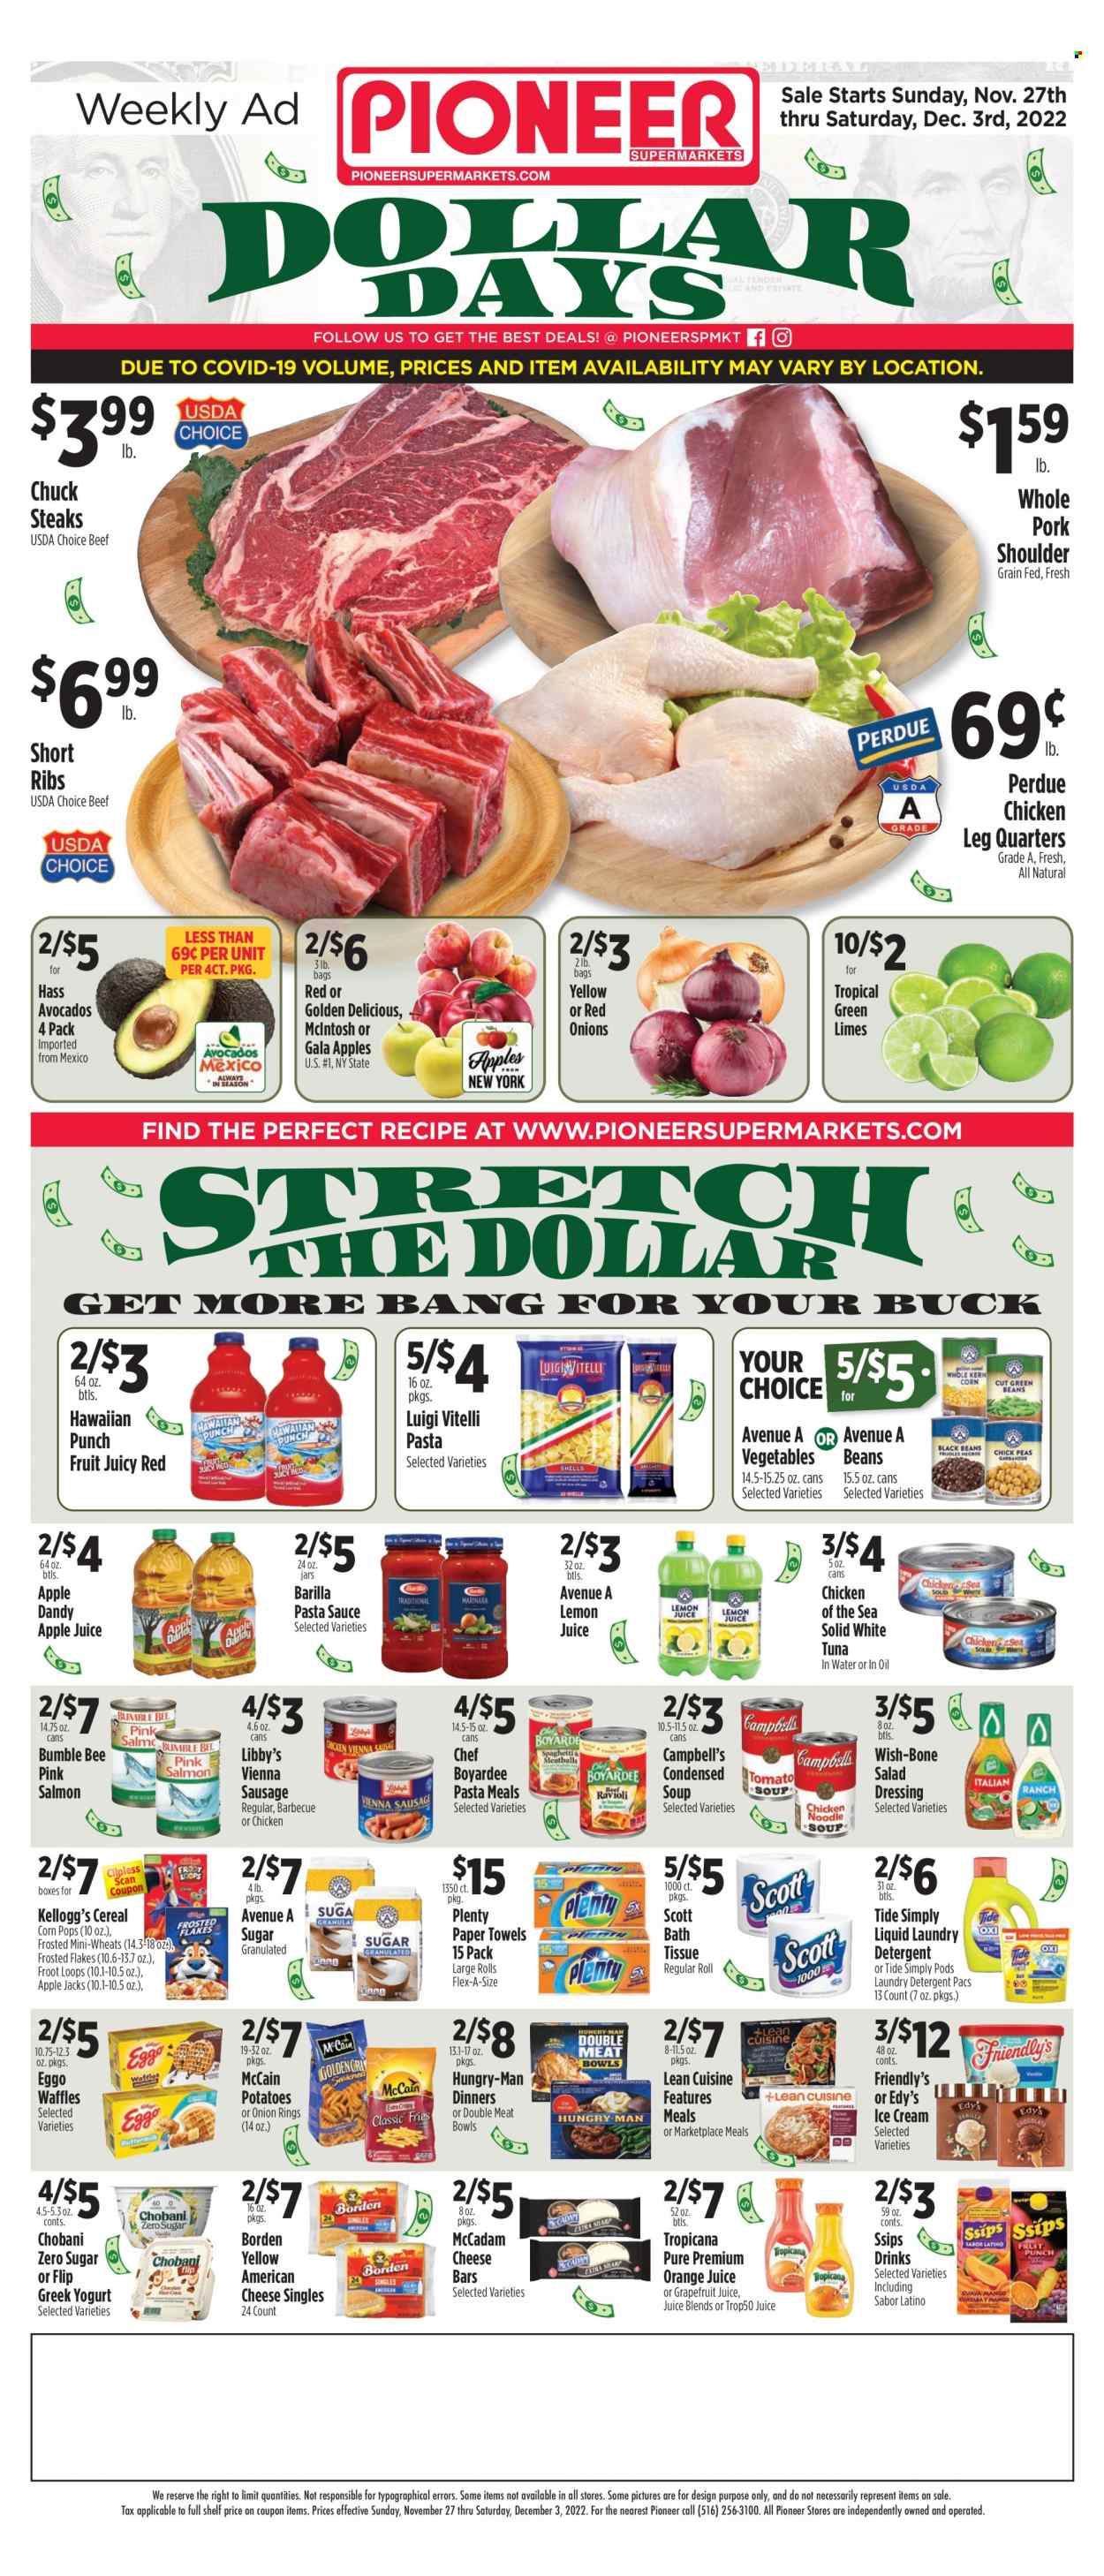 thumbnail - Pioneer Supermarkets Flyer - 11/27/2022 - 12/03/2022 - Sales products - waffles, beans, red onions, potatoes, avocado, Gala, limes, Golden Delicious, salmon, tuna, Campbell's, pasta sauce, onion rings, condensed soup, soup, Bumble Bee, sauce, Barilla, instant soup, Lean Cuisine, Perdue®, sausage, vienna sausage, american cheese, greek yoghurt, yoghurt, Chobani, ice cream, Friendly's Ice Cream, McCain, Kellogg's, Chicken of the Sea, Chef Boyardee, cereals, Frosted Flakes, Corn Pops, salad dressing, dressing, apple juice, orange juice, lemon juice, chicken legs, steak, pork meat, pork shoulder, bath tissue, Scott, Plenty, kitchen towels, paper towels, detergent, Tide, laundry detergent. Page 1.